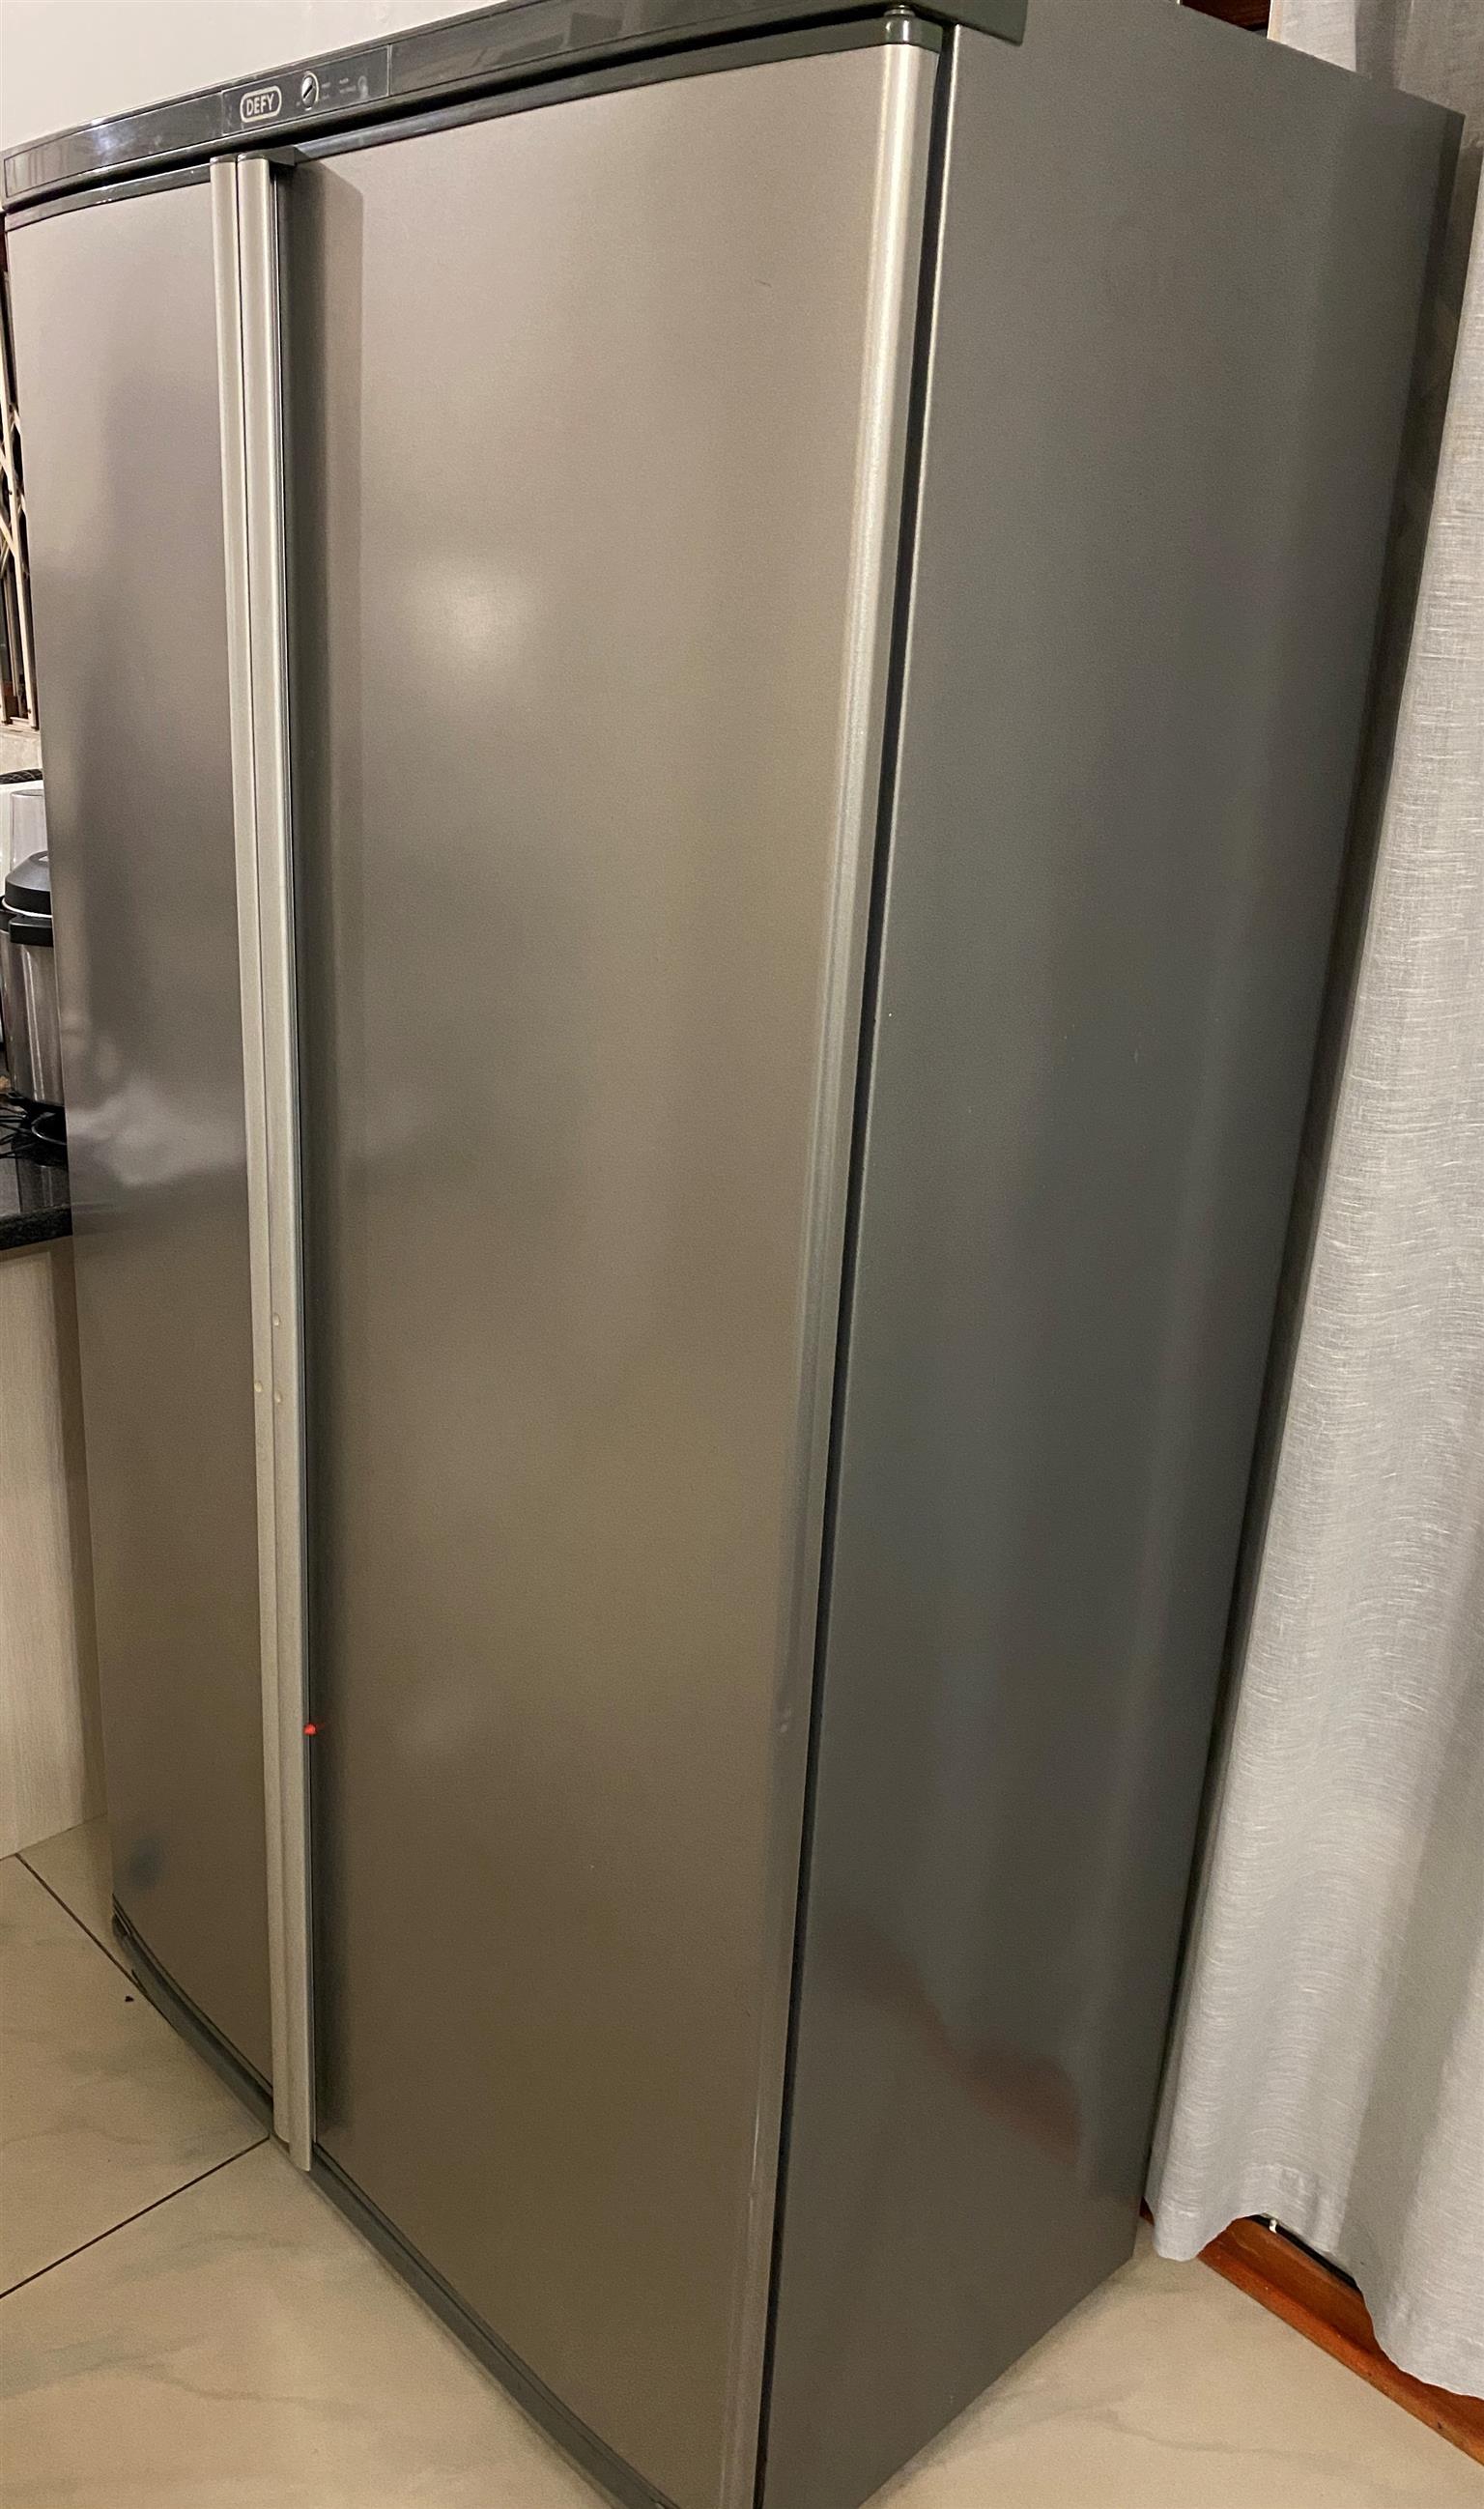 DEFY side-by side fridge/freezer for sale-good condition